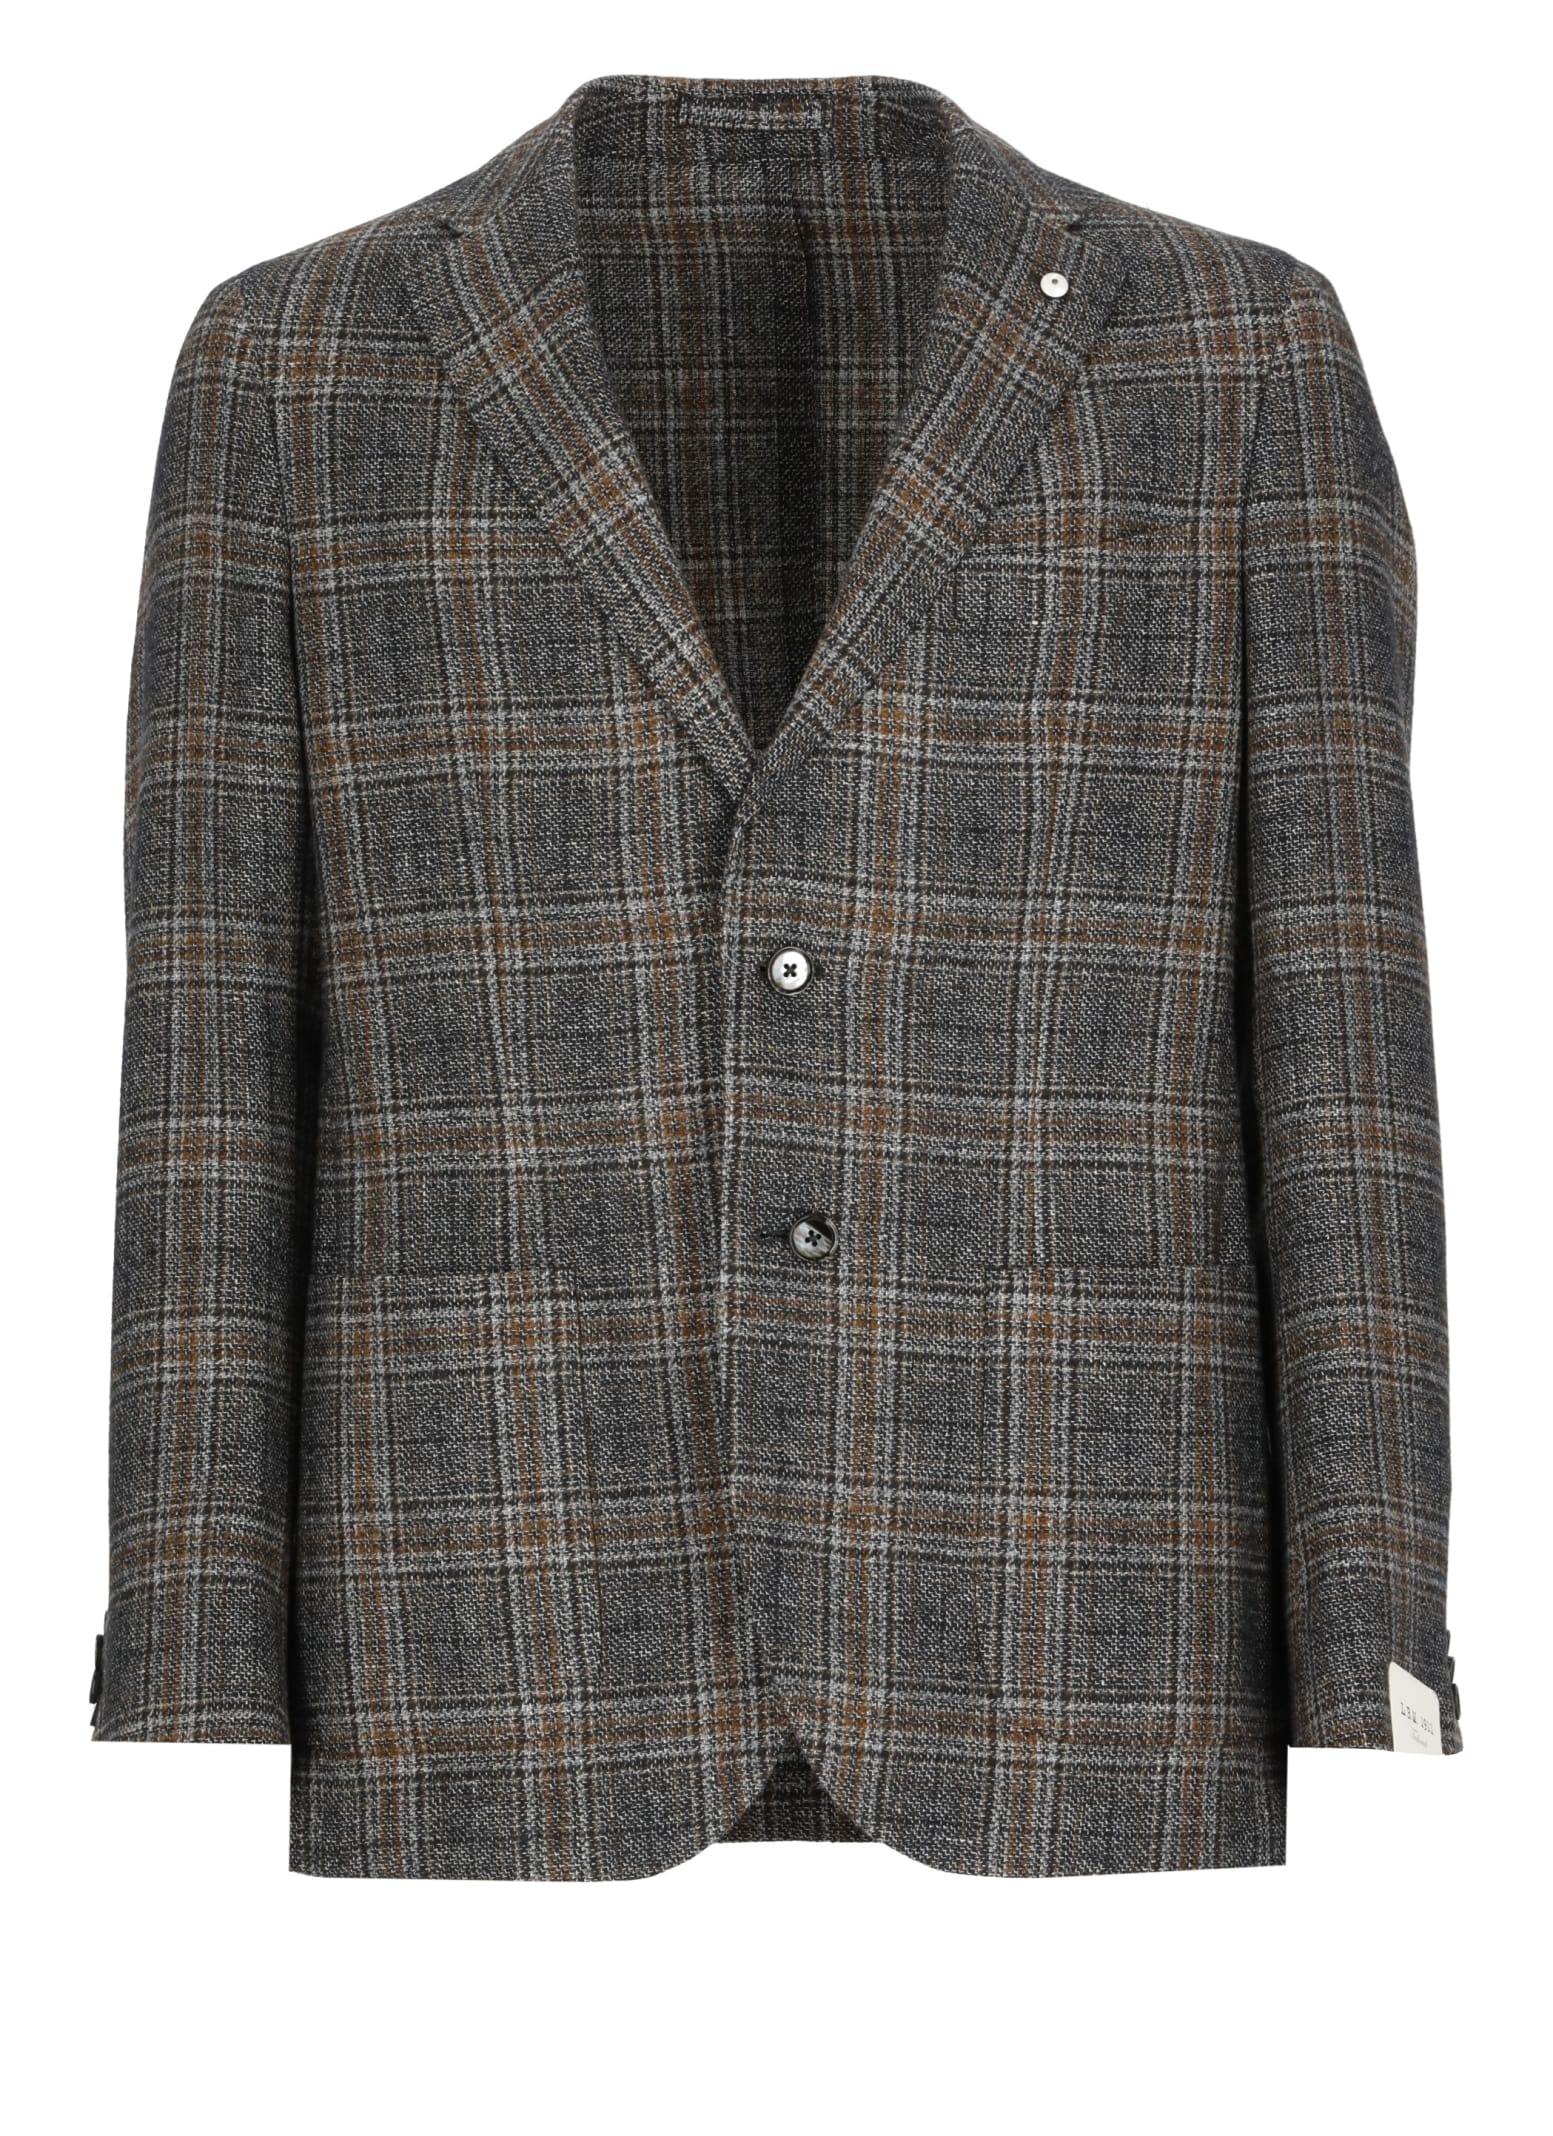 L.B.M. 1911 Wool And Linen Jacket